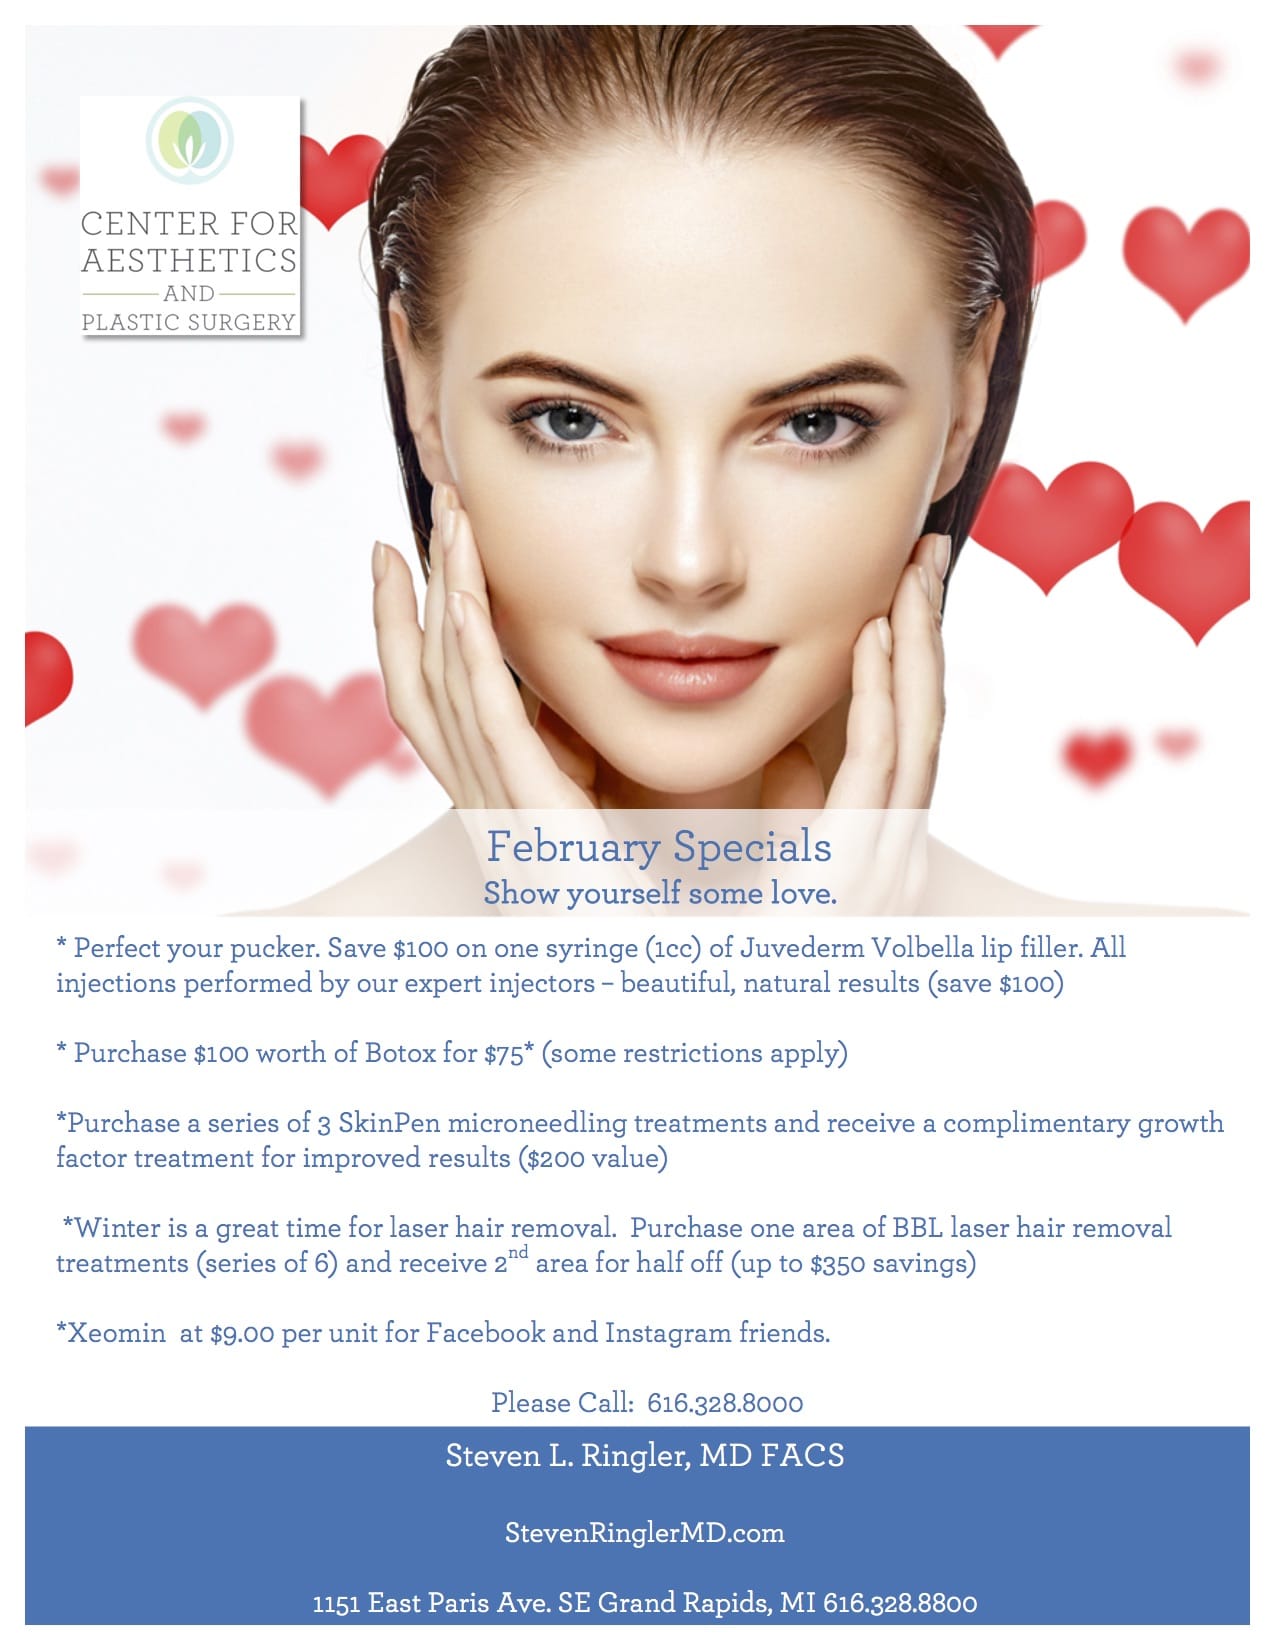 Specials on Plastic Surgery in Grand Rapids